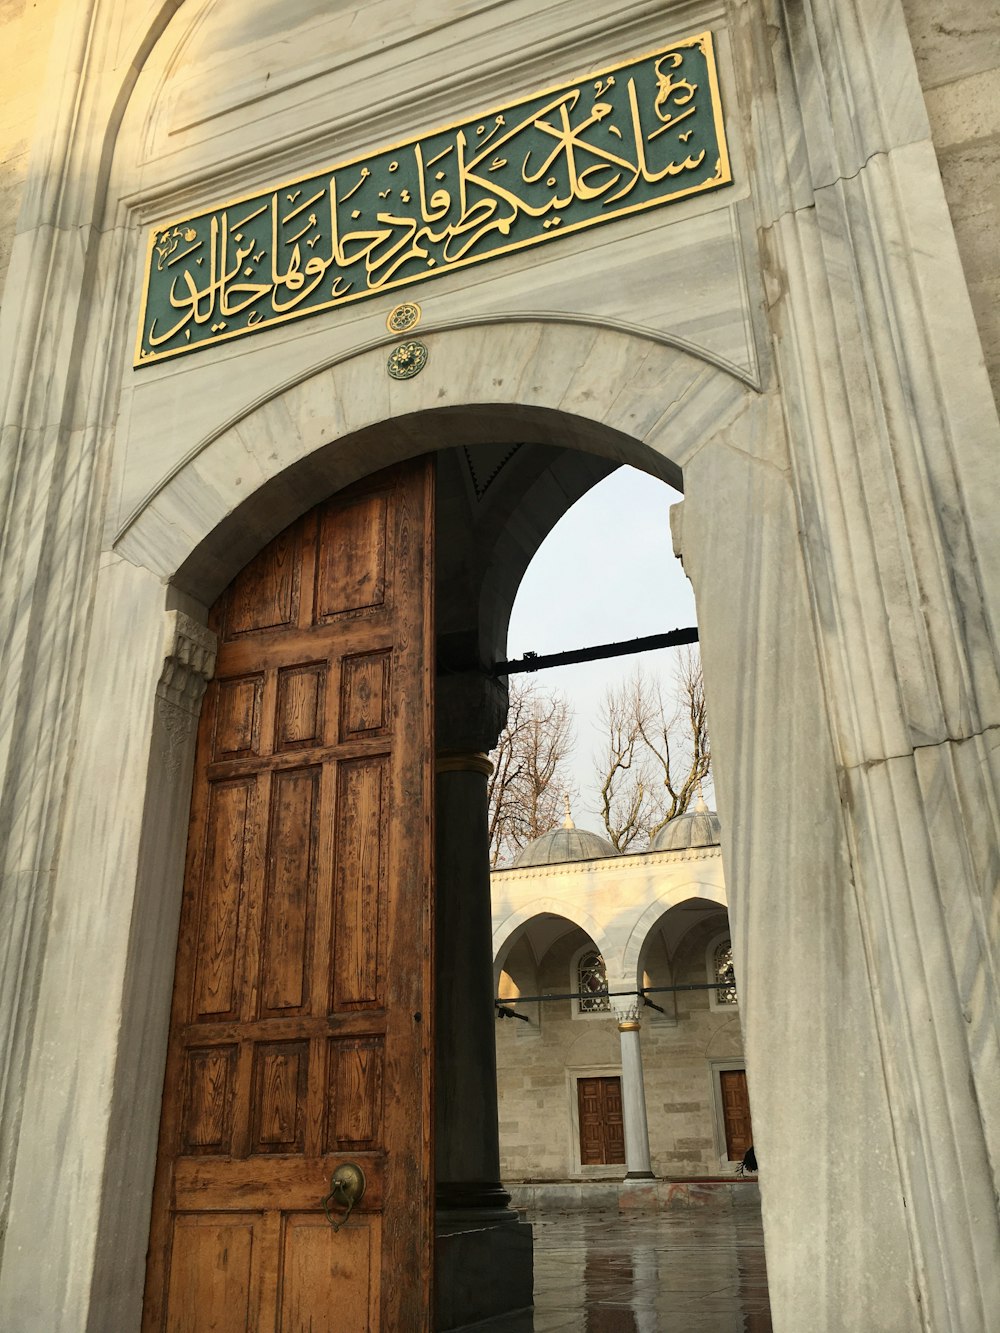 a large wooden door with arabic writing on it